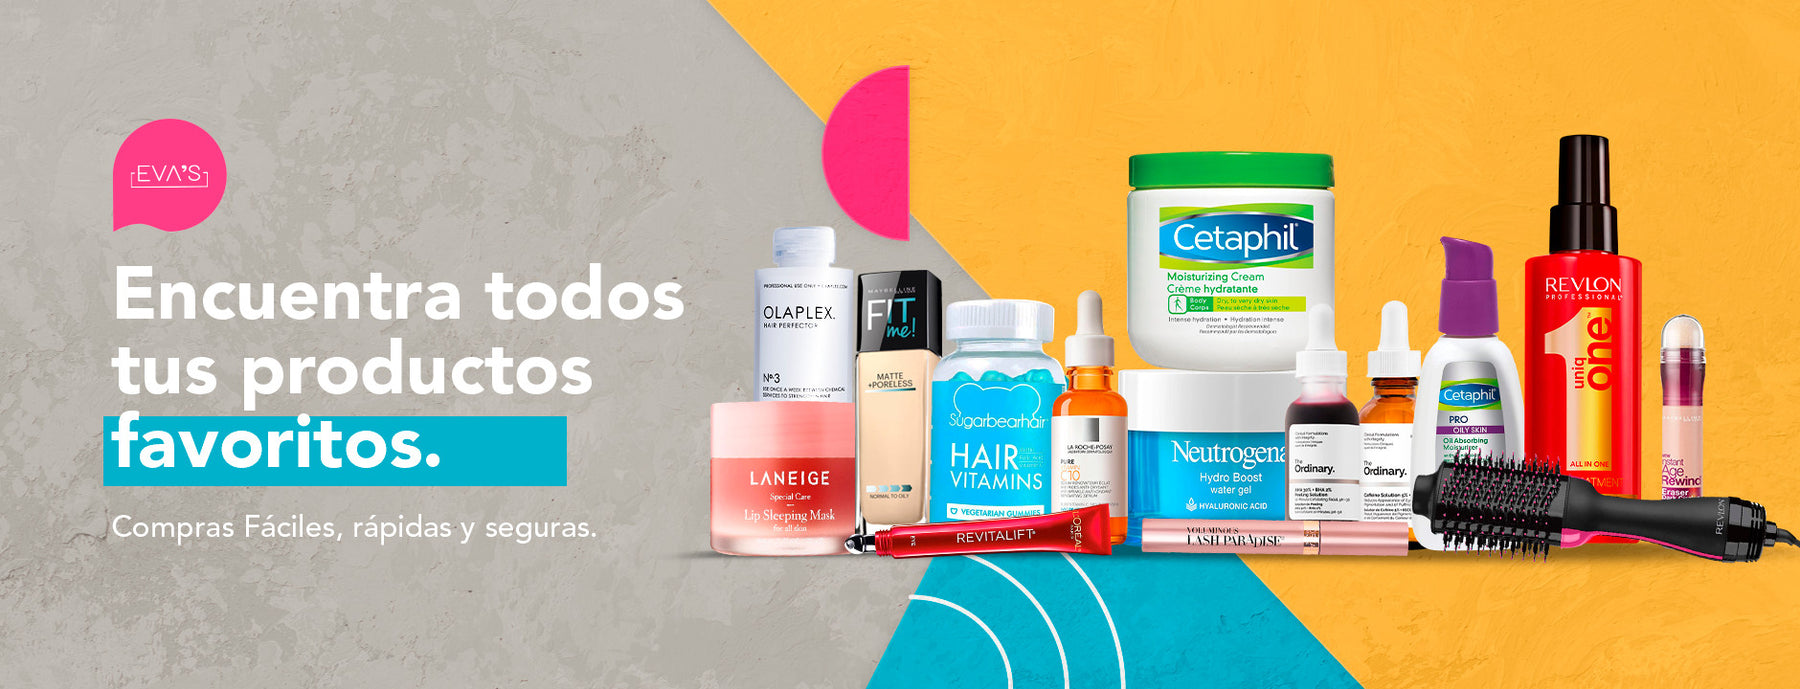 Herbal Essences collection banner